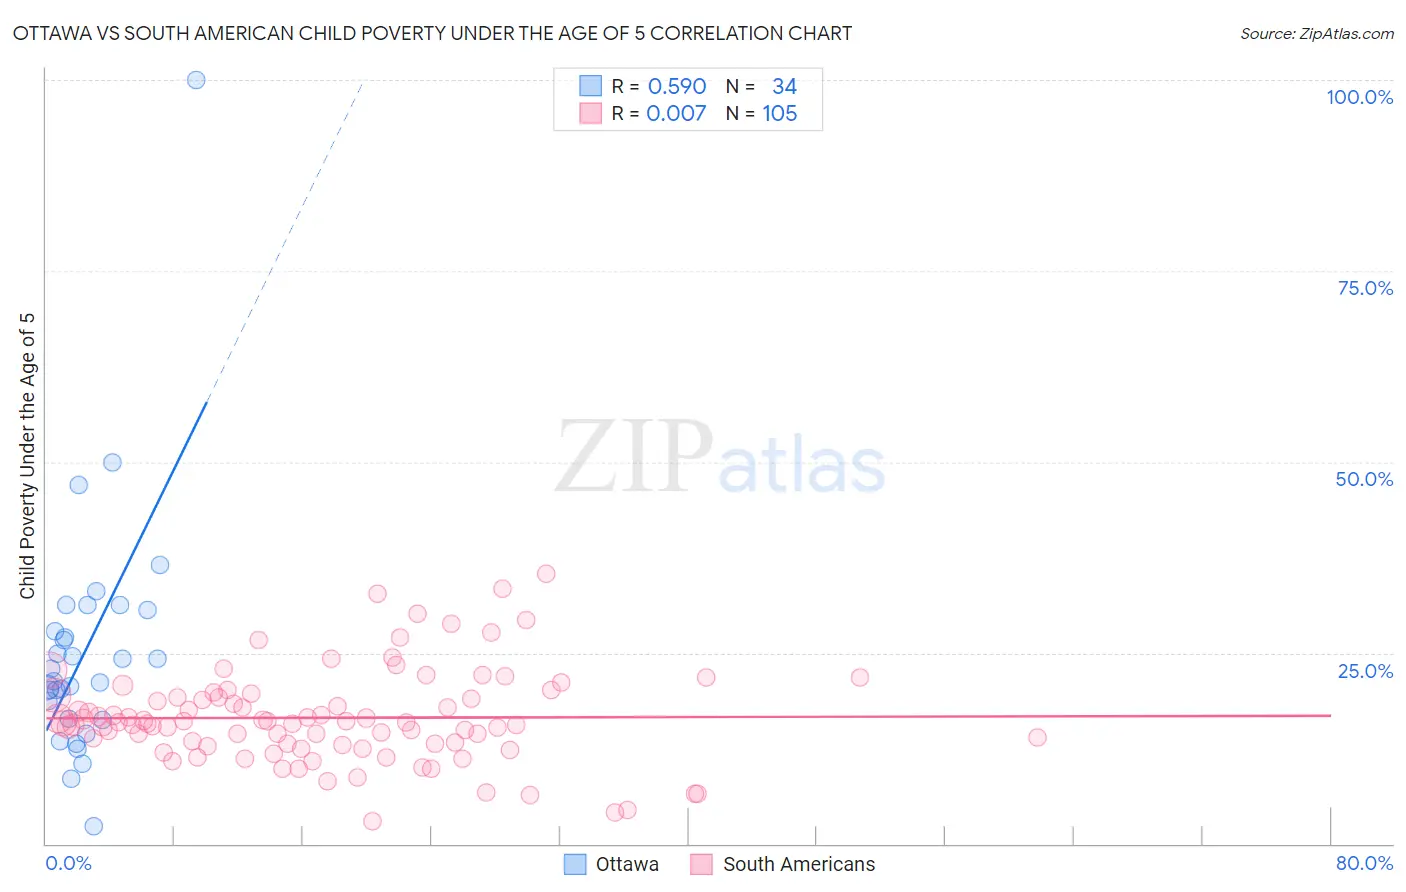 Ottawa vs South American Child Poverty Under the Age of 5